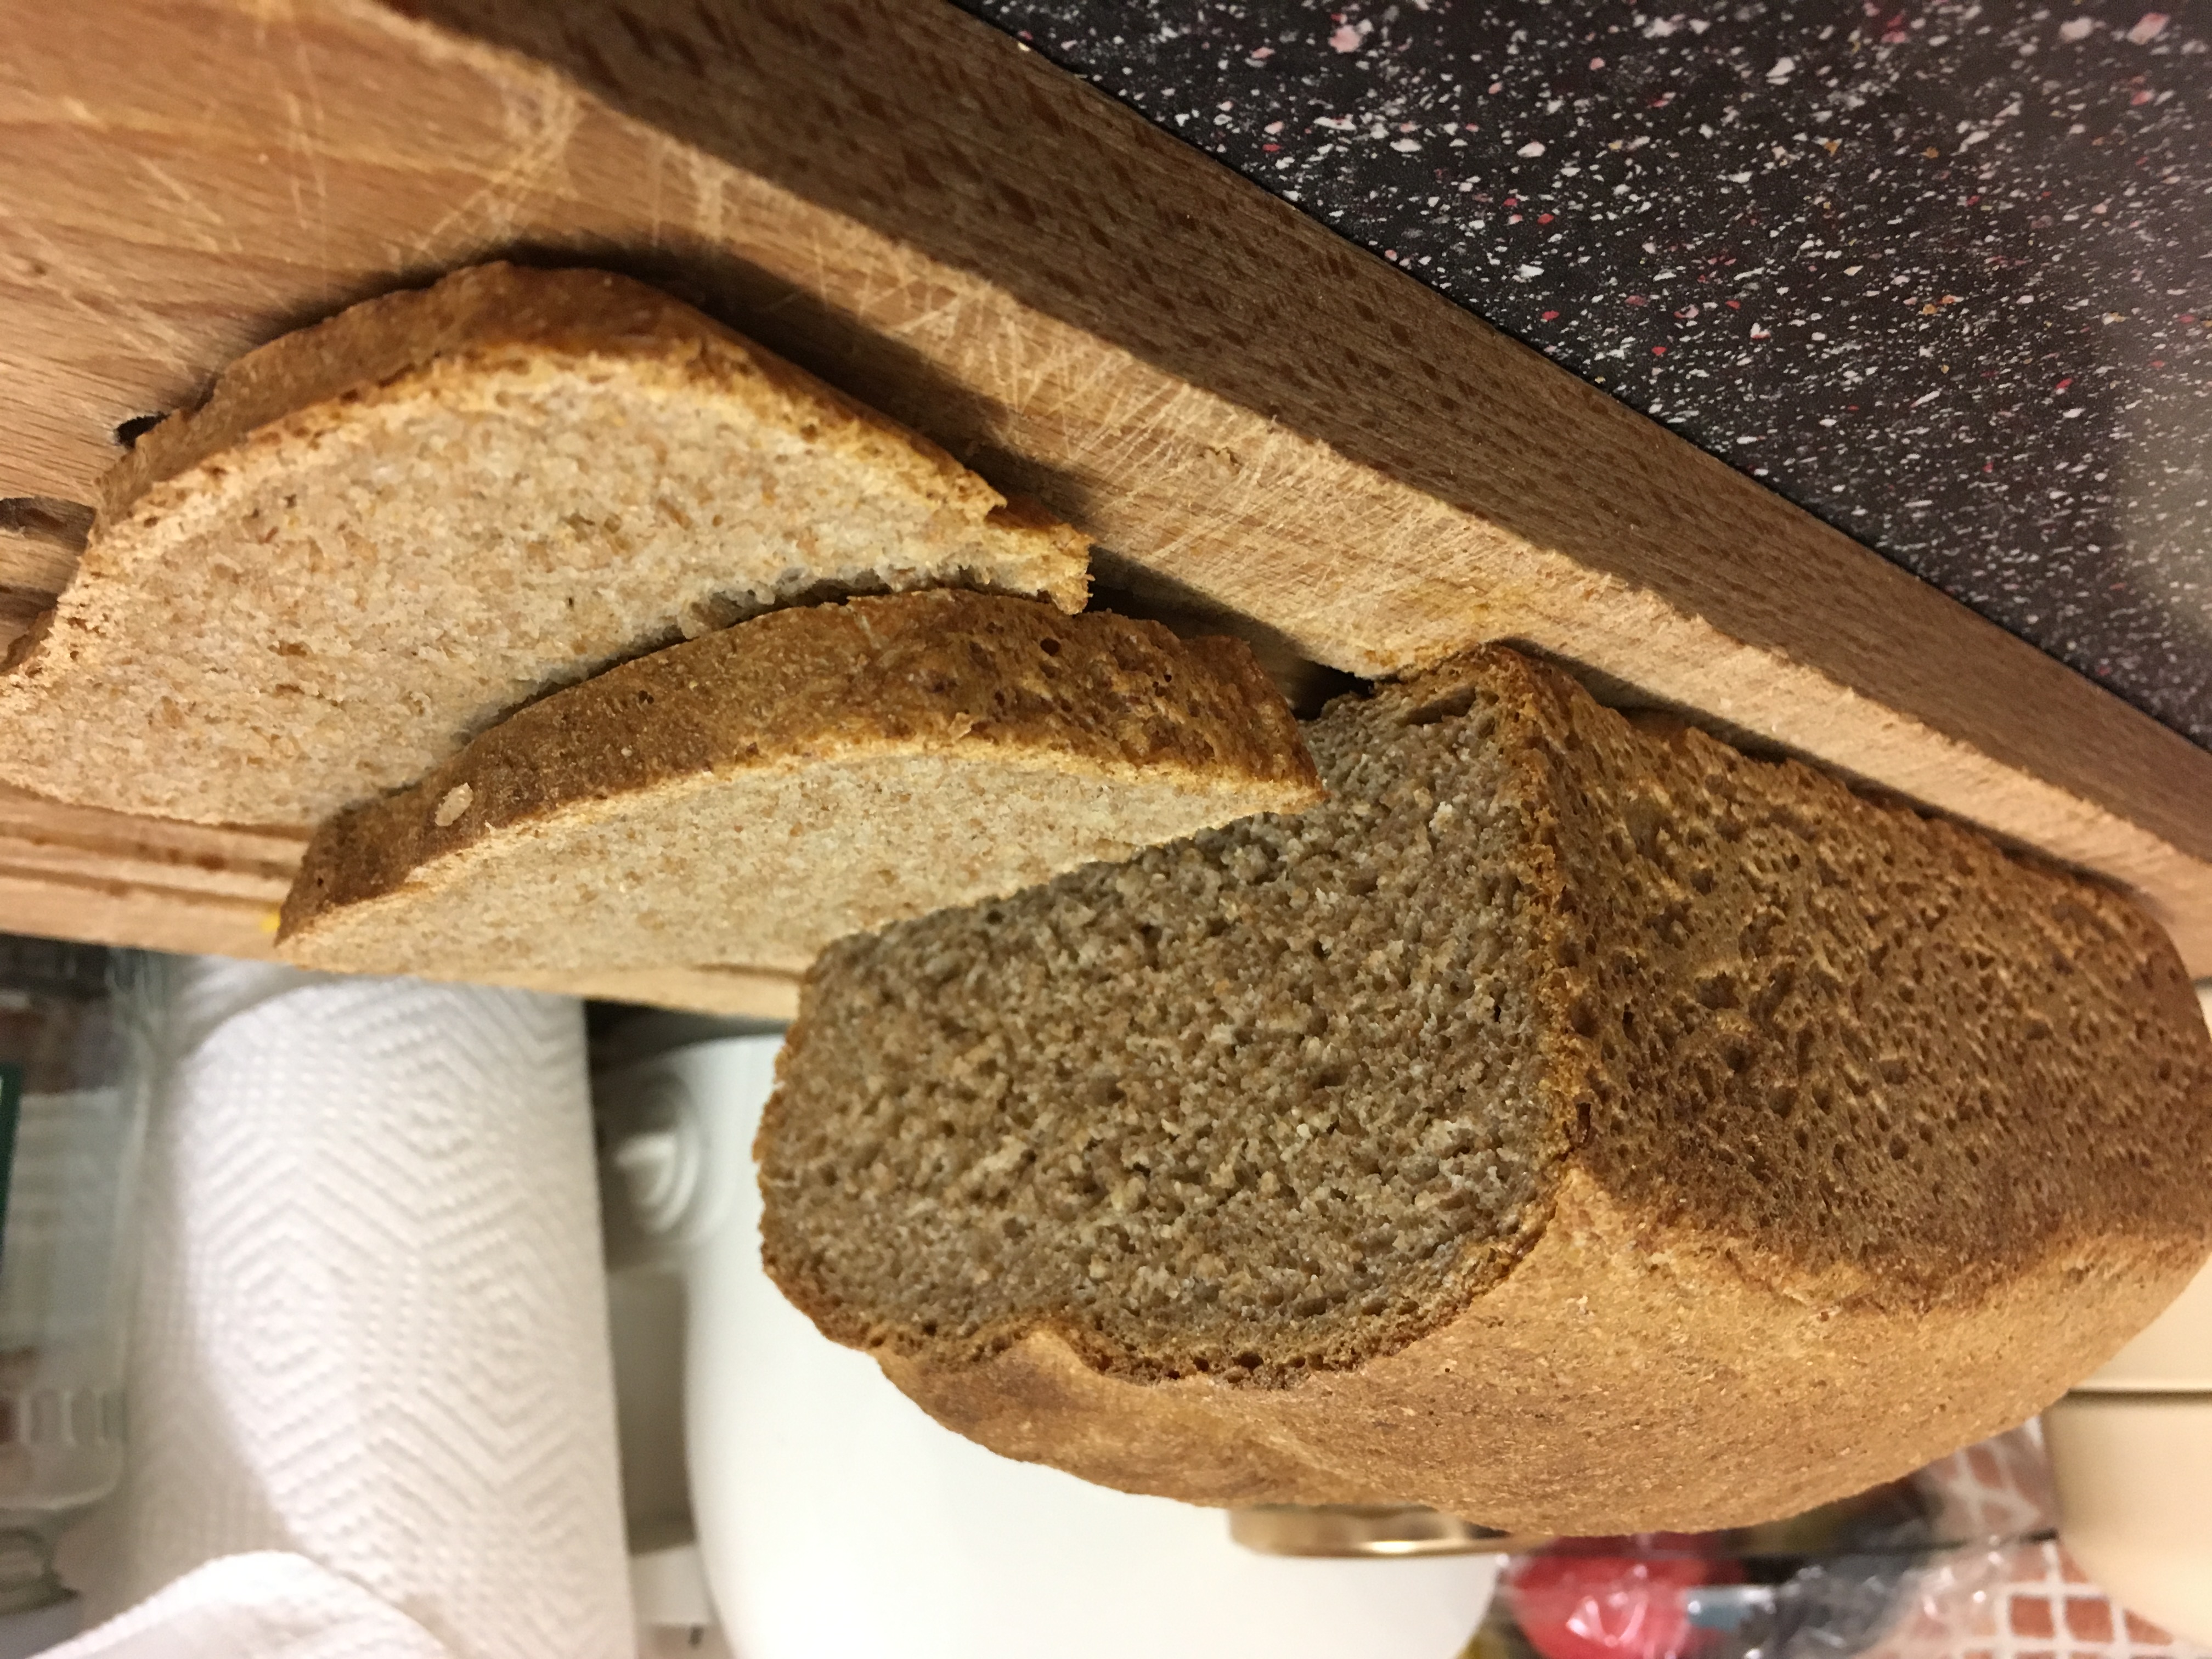 An image of a bread called “Bread No. 1”